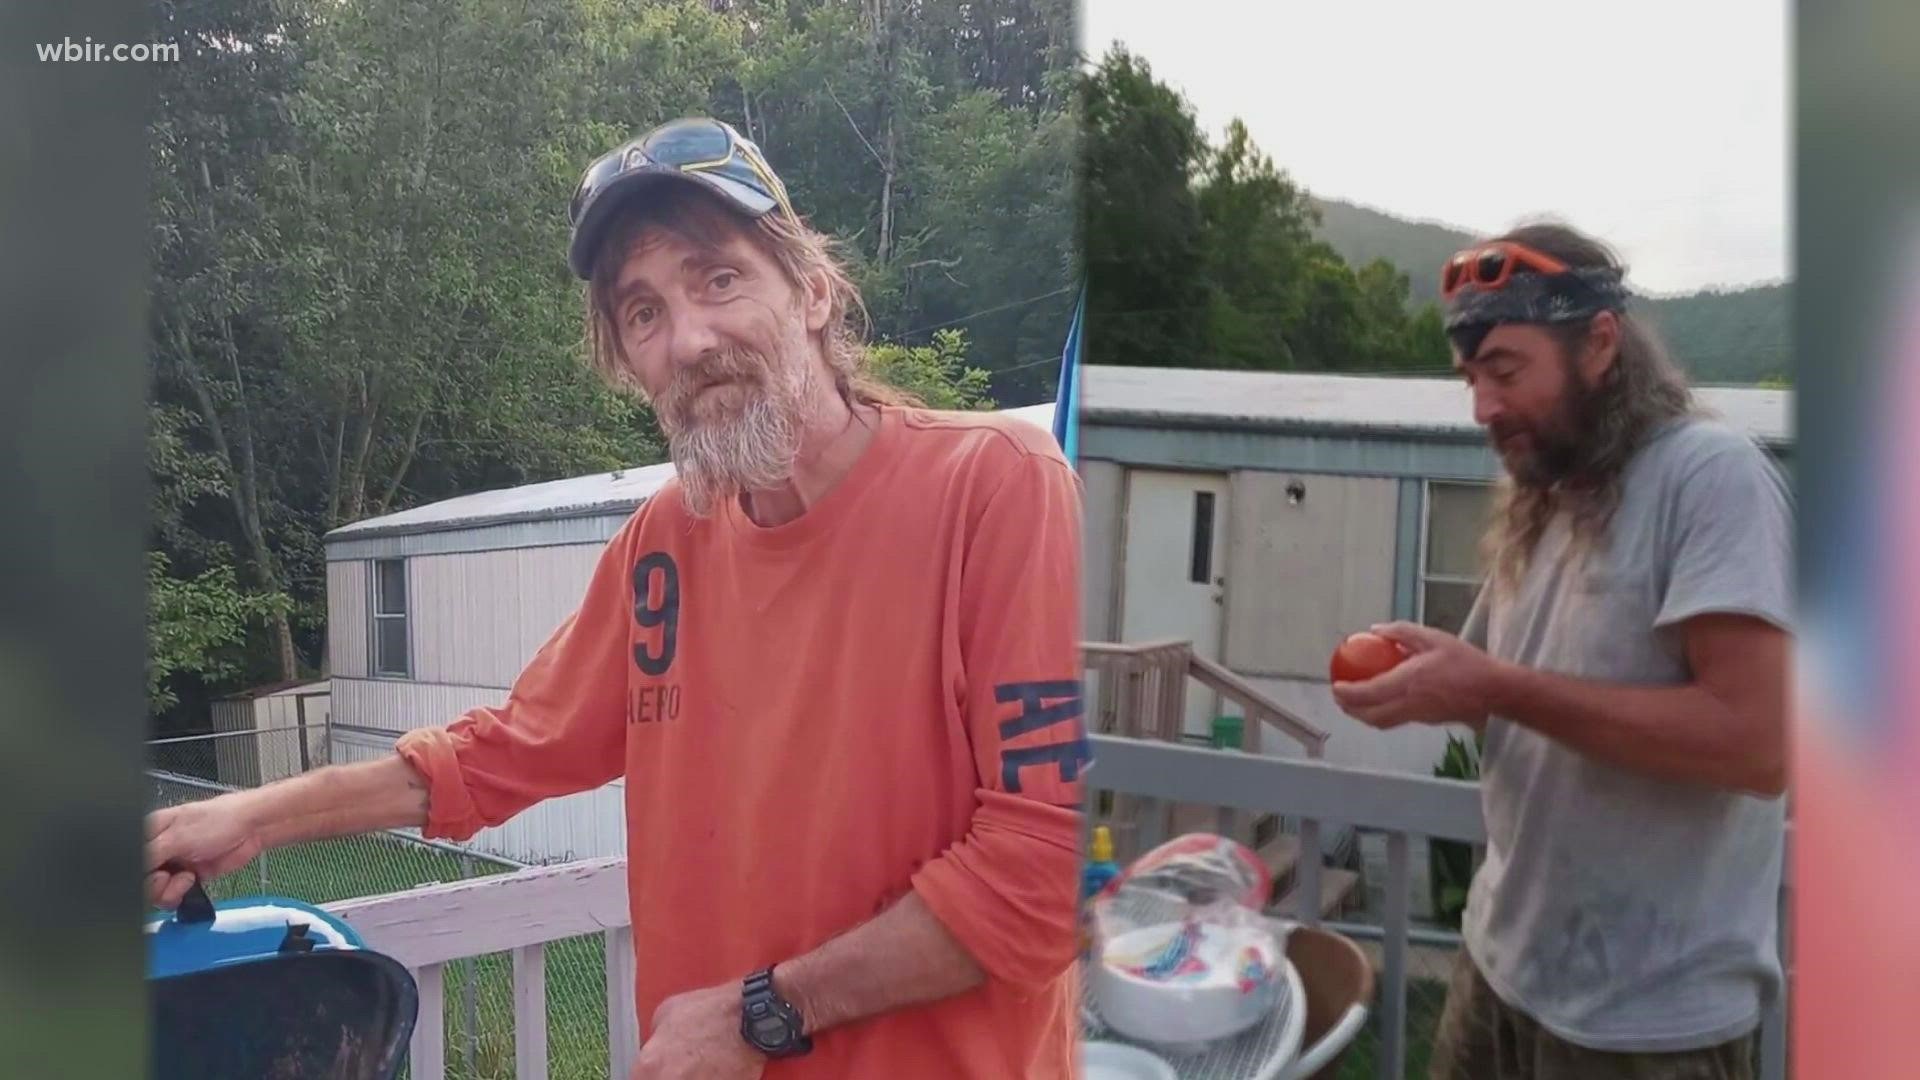 Scotty and Tracy Hawkins, 51 and 44 respectively, were last seen when they went ginseng hunting near the Anderson County line